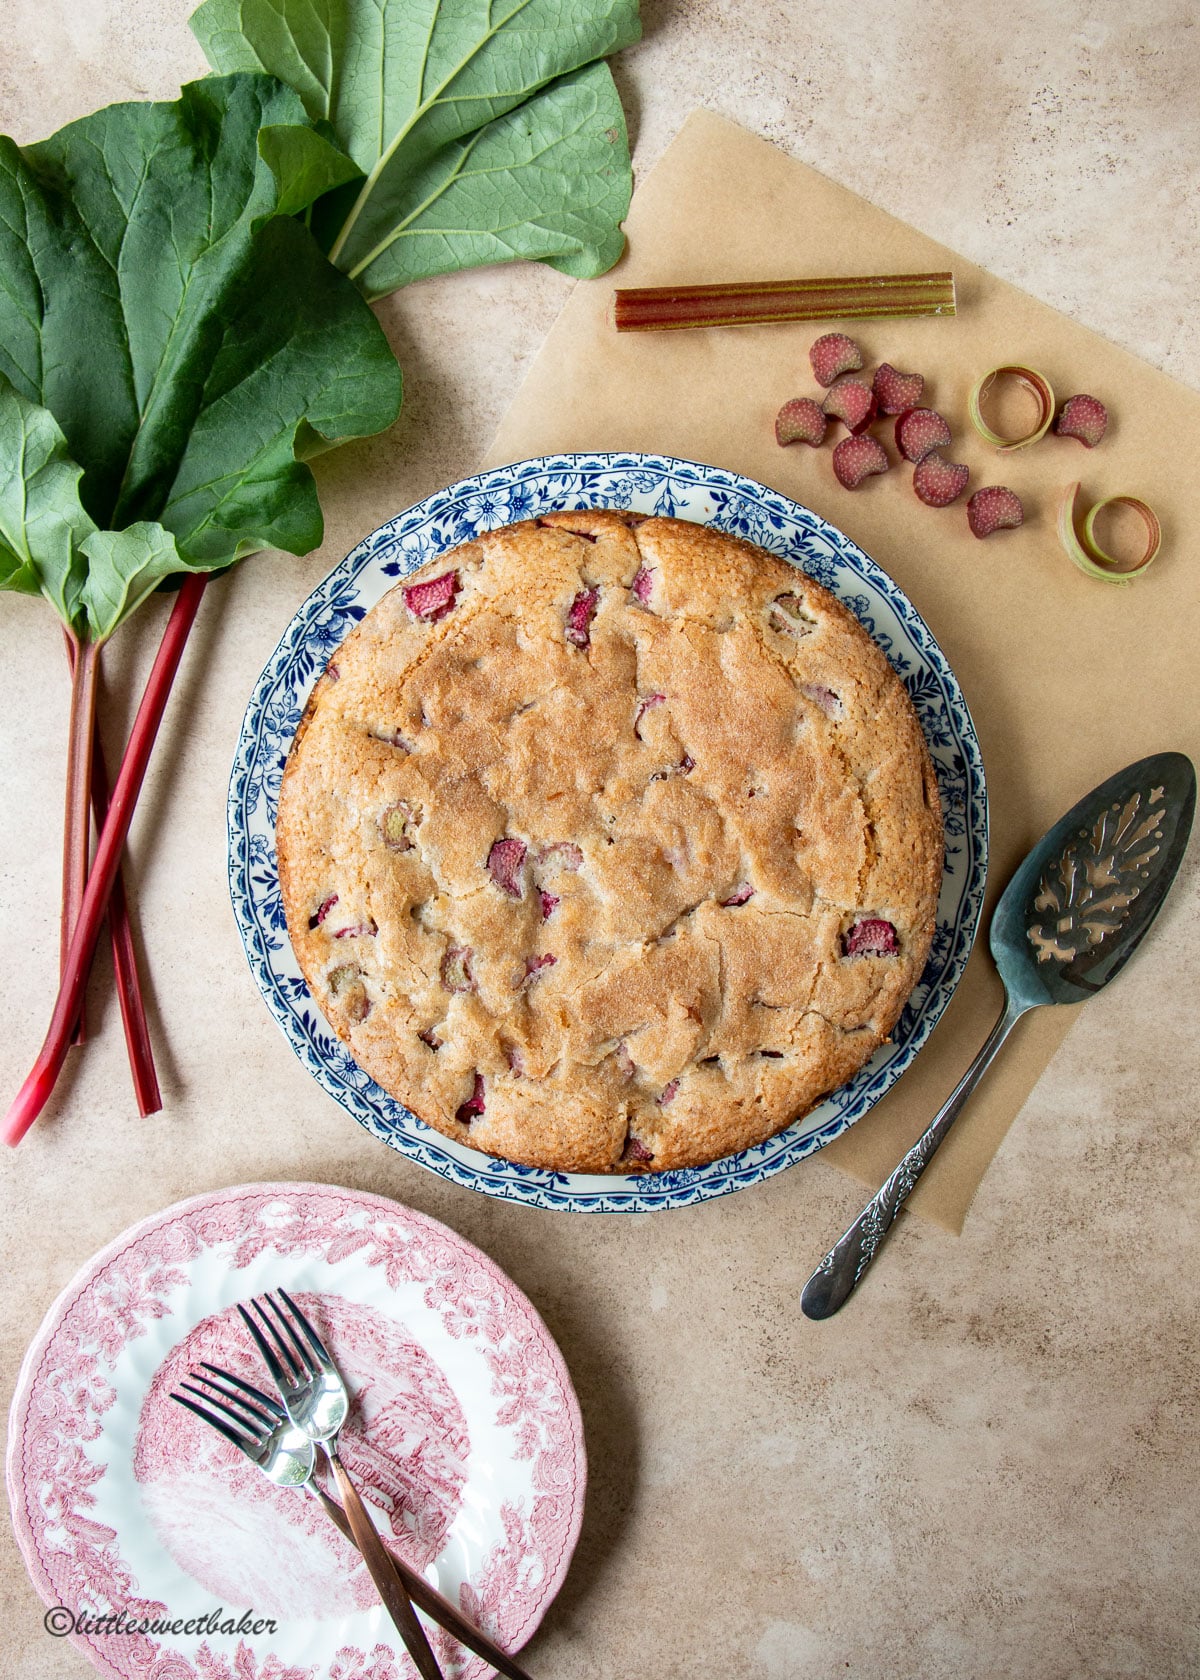 A whole rhubarb cake on a blue and white plate surrounded by rhubarb on the light brown surface.